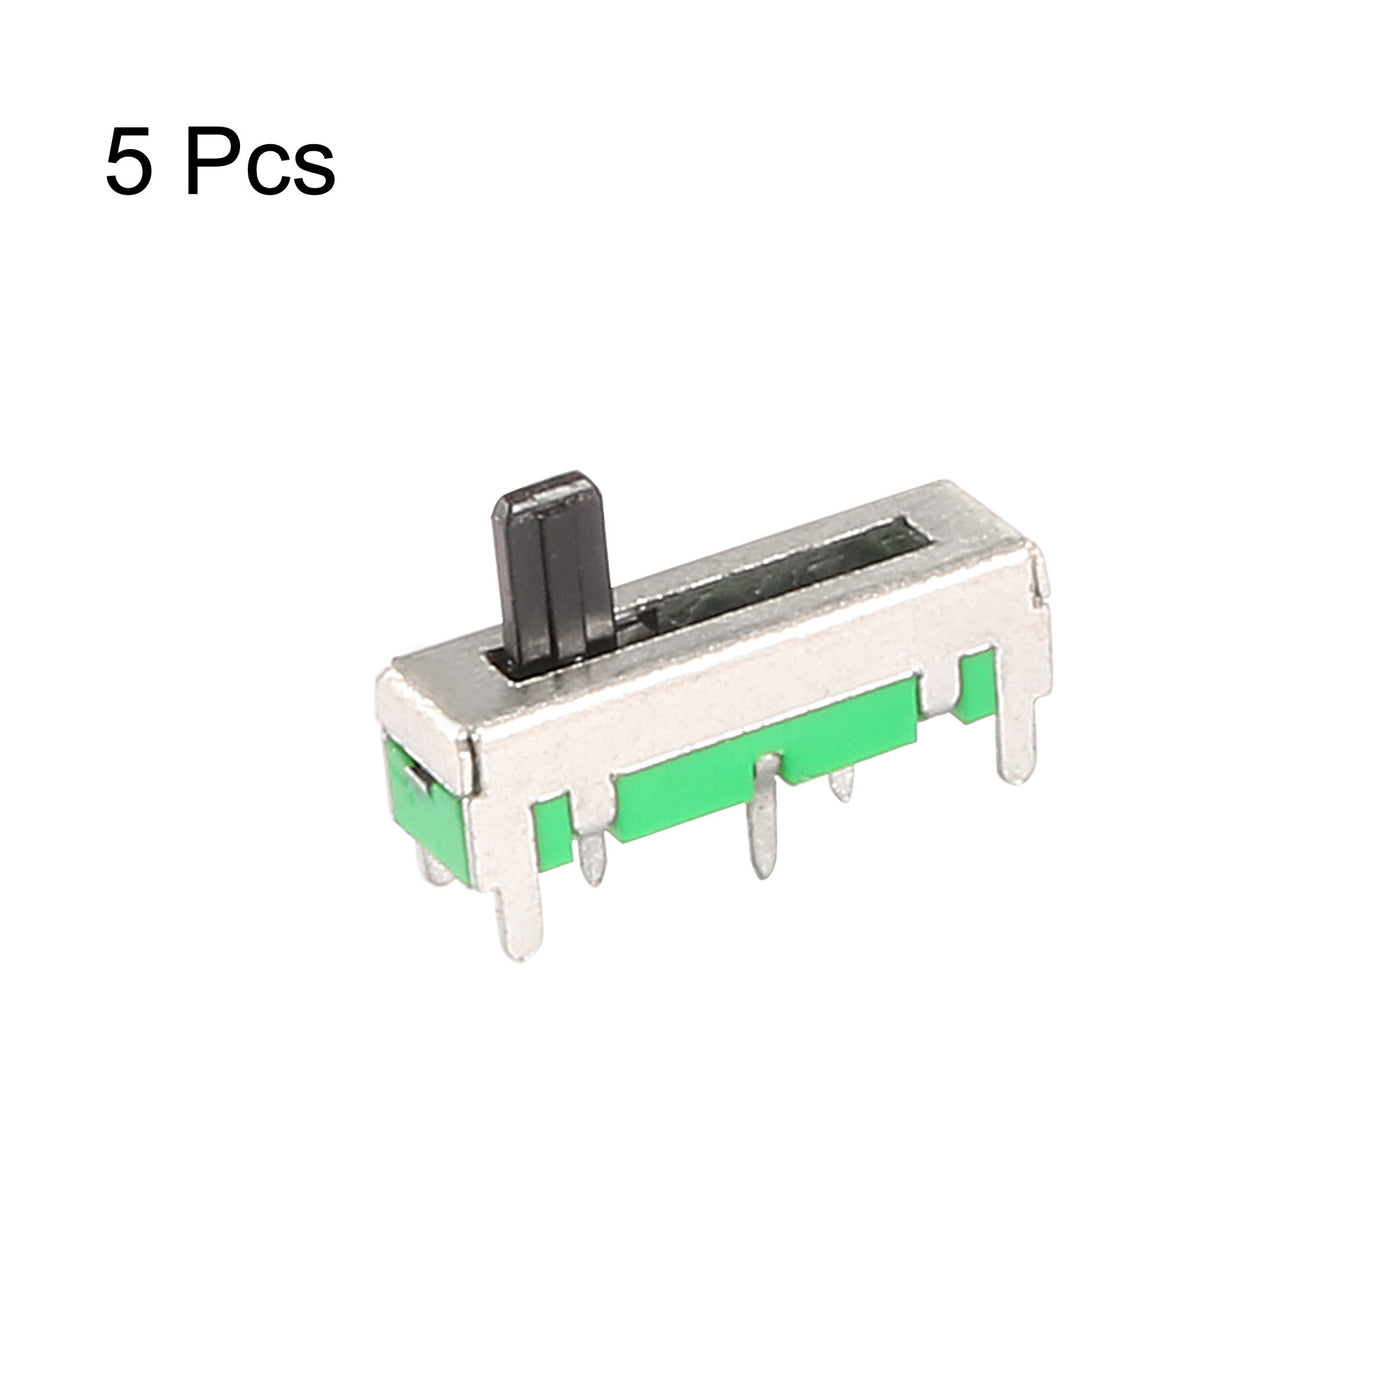 uxcell Uxcell 5pcs Fader Variable Resistors Mixer 18mm Straight Slide Potentiometer B503  B50K Ohm Linear Single Potentiometers for Dimming Tuning